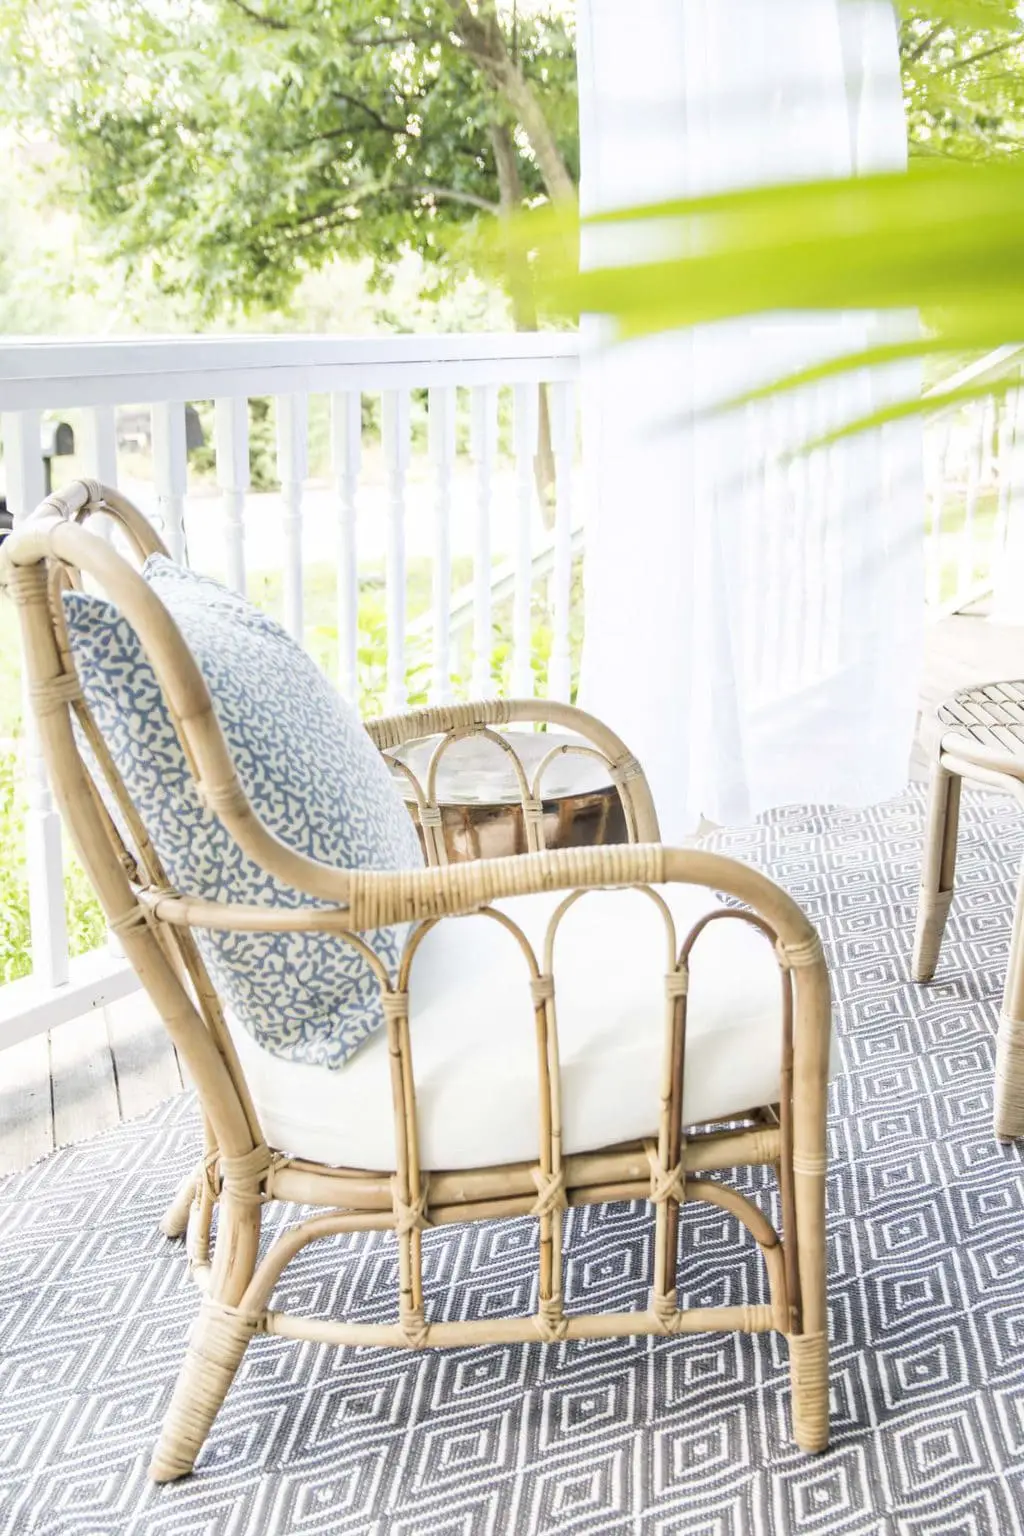 Rattan armchair with DecoratorsBest outdoor throw pillow, blue porch makeover on Thou Swell @thouswellblog